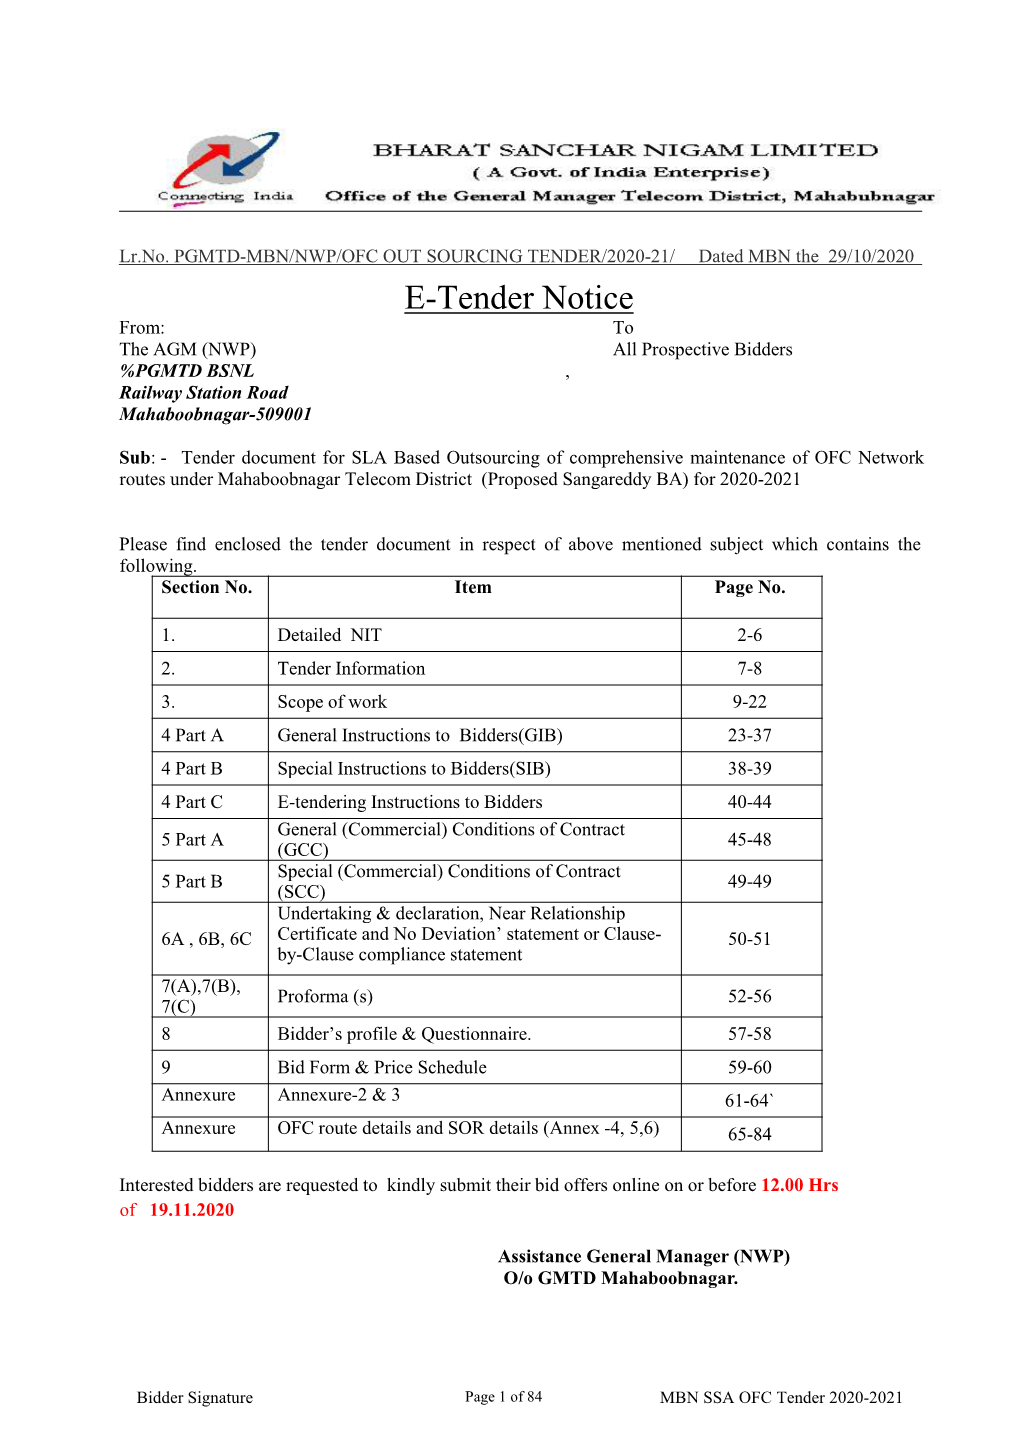 E-Tender Notice From: to the AGM (NWP) All Prospective Bidders %PGMTD BSNL , Railway Station Road Mahaboobnagar-509001